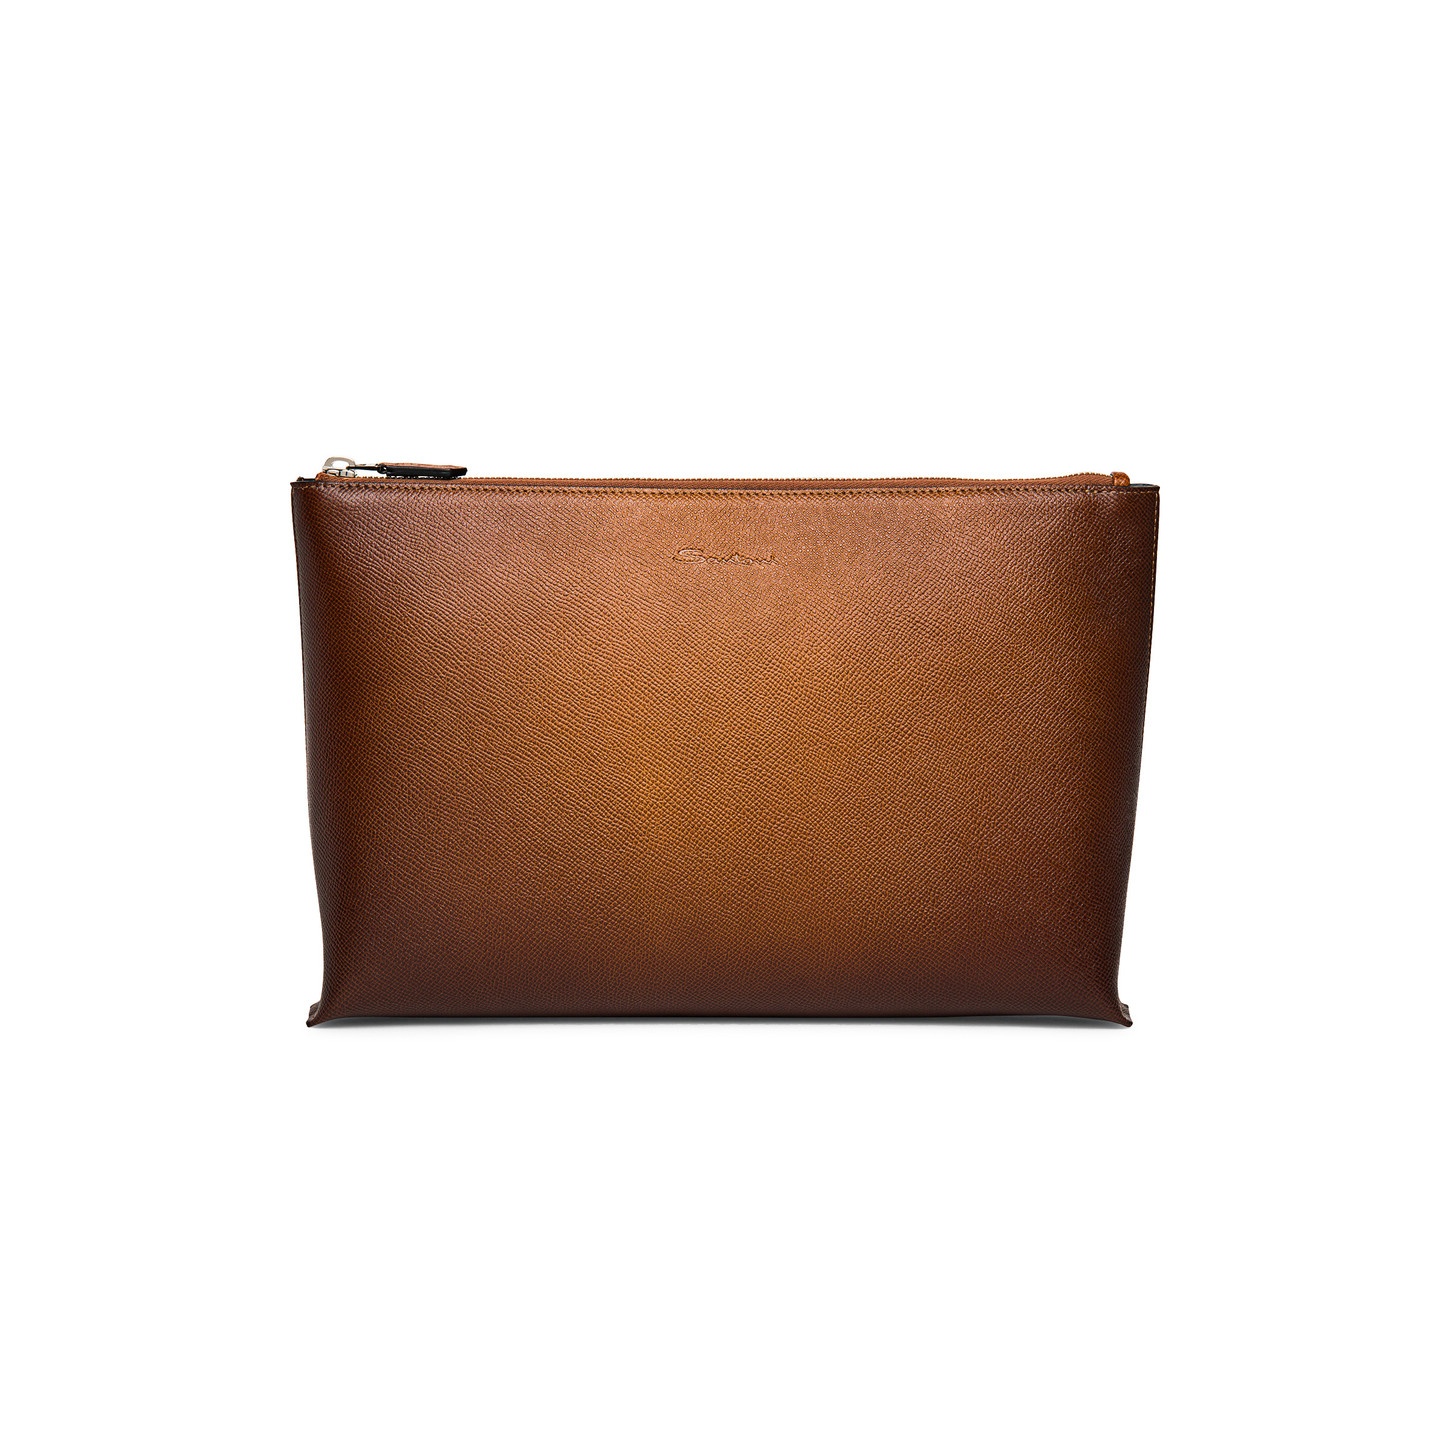 Brown saffiano leather pouch - 1